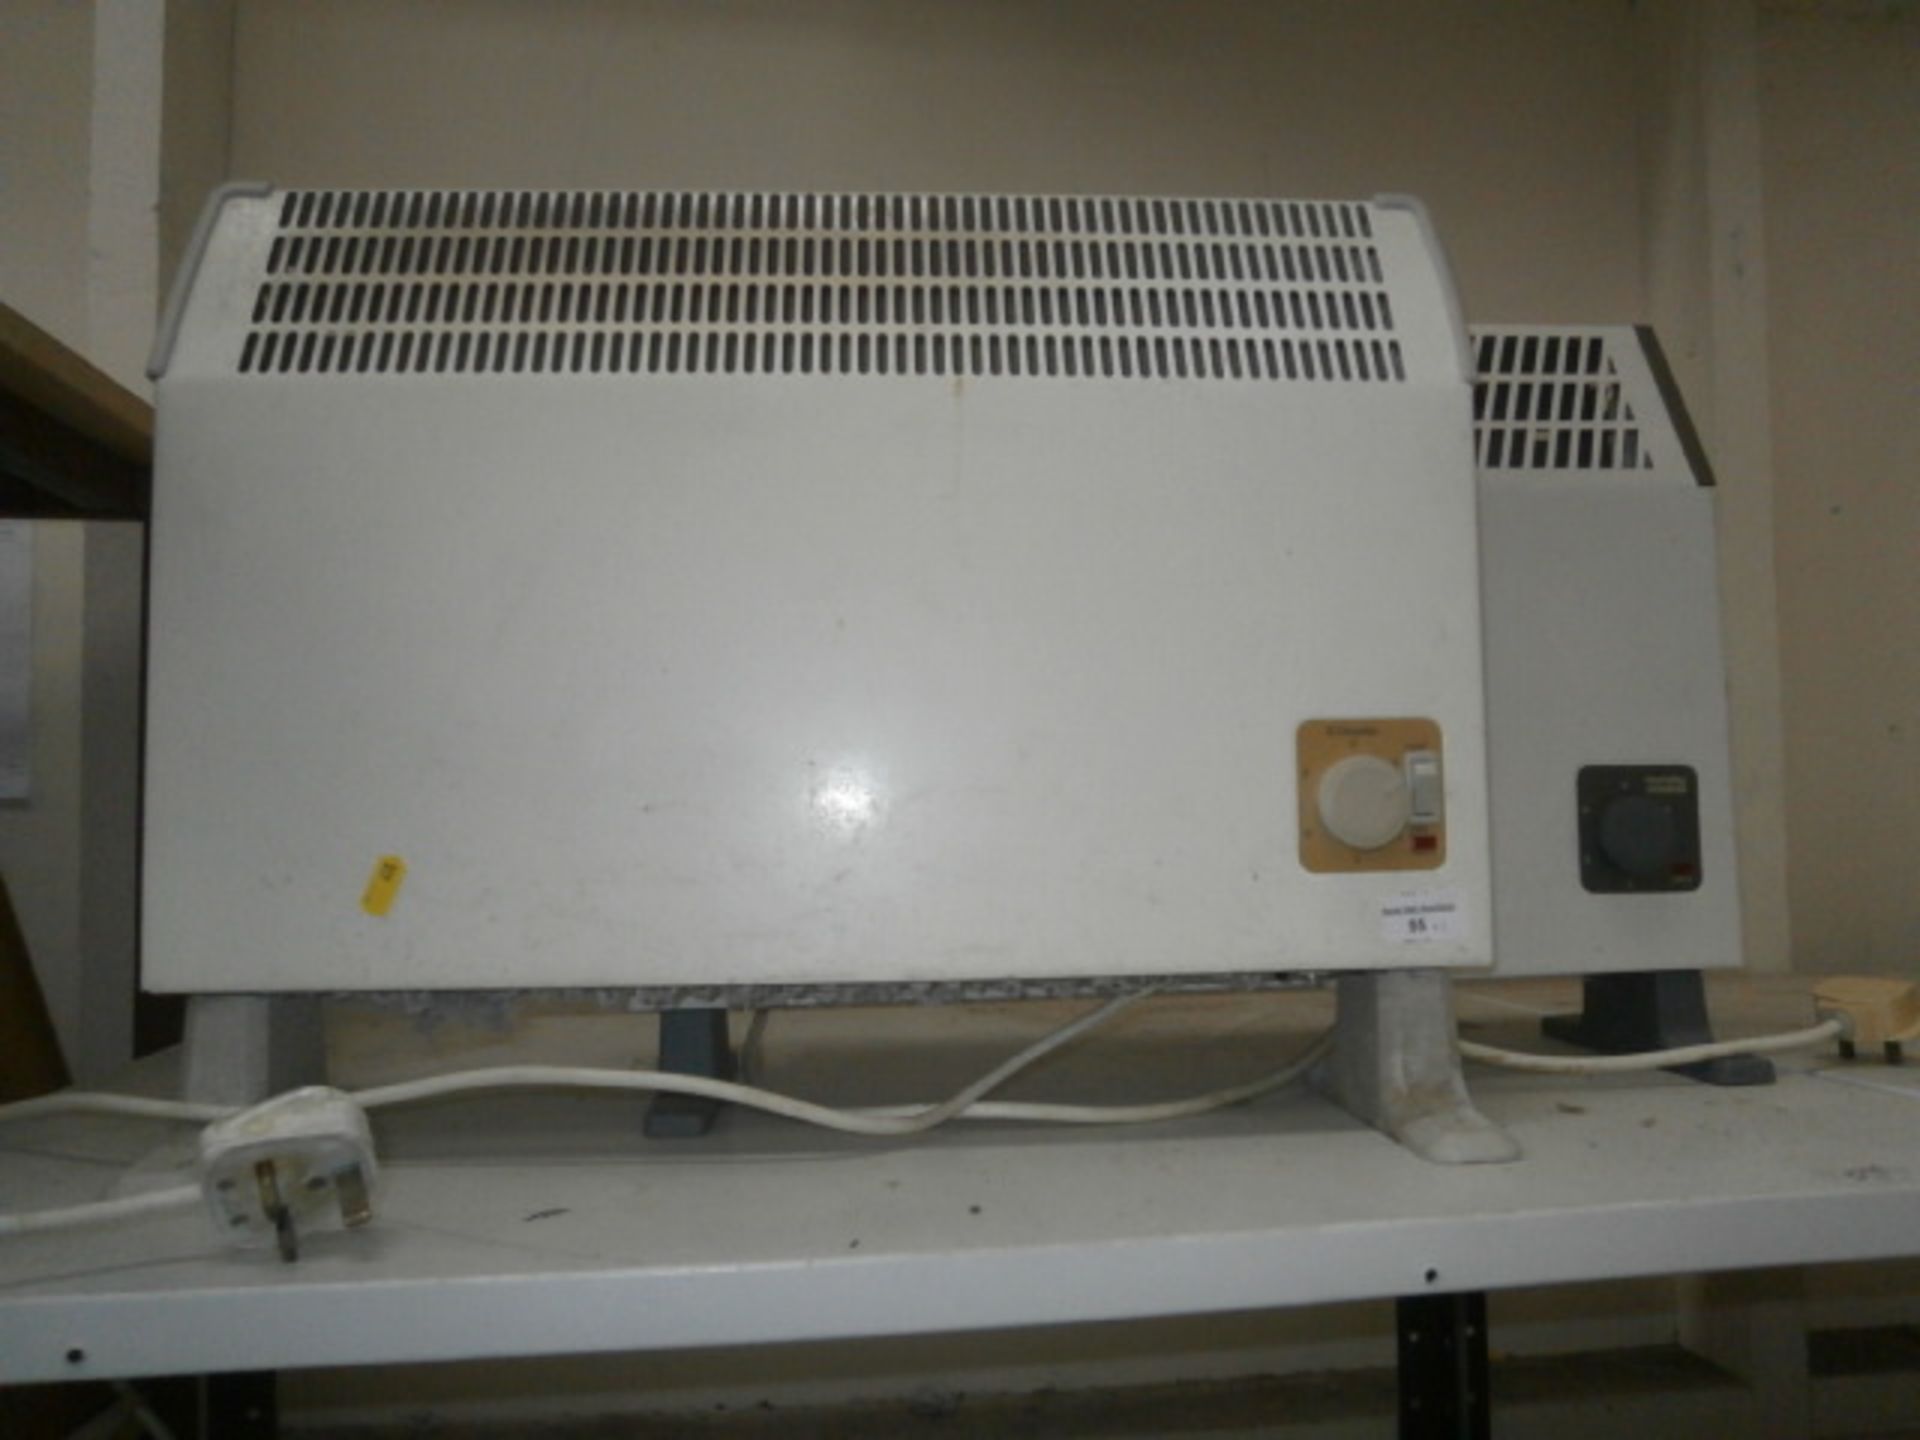 2 electric heaters